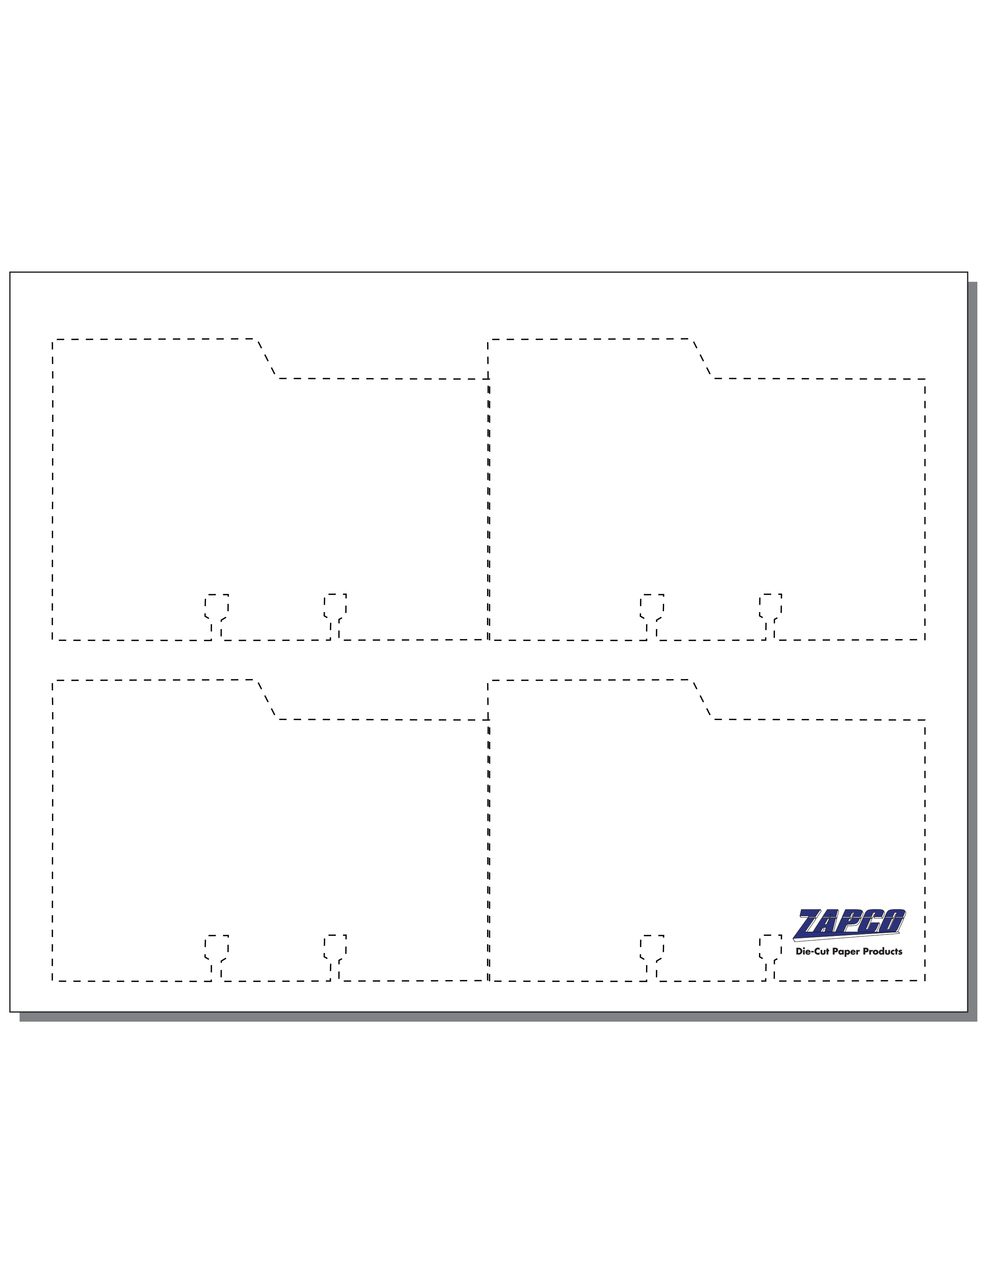 Item 121: 4-Up 3" x 5" Rotary File Card Left Tab 8 1/2" x 11" Sheet(250 Sheets)